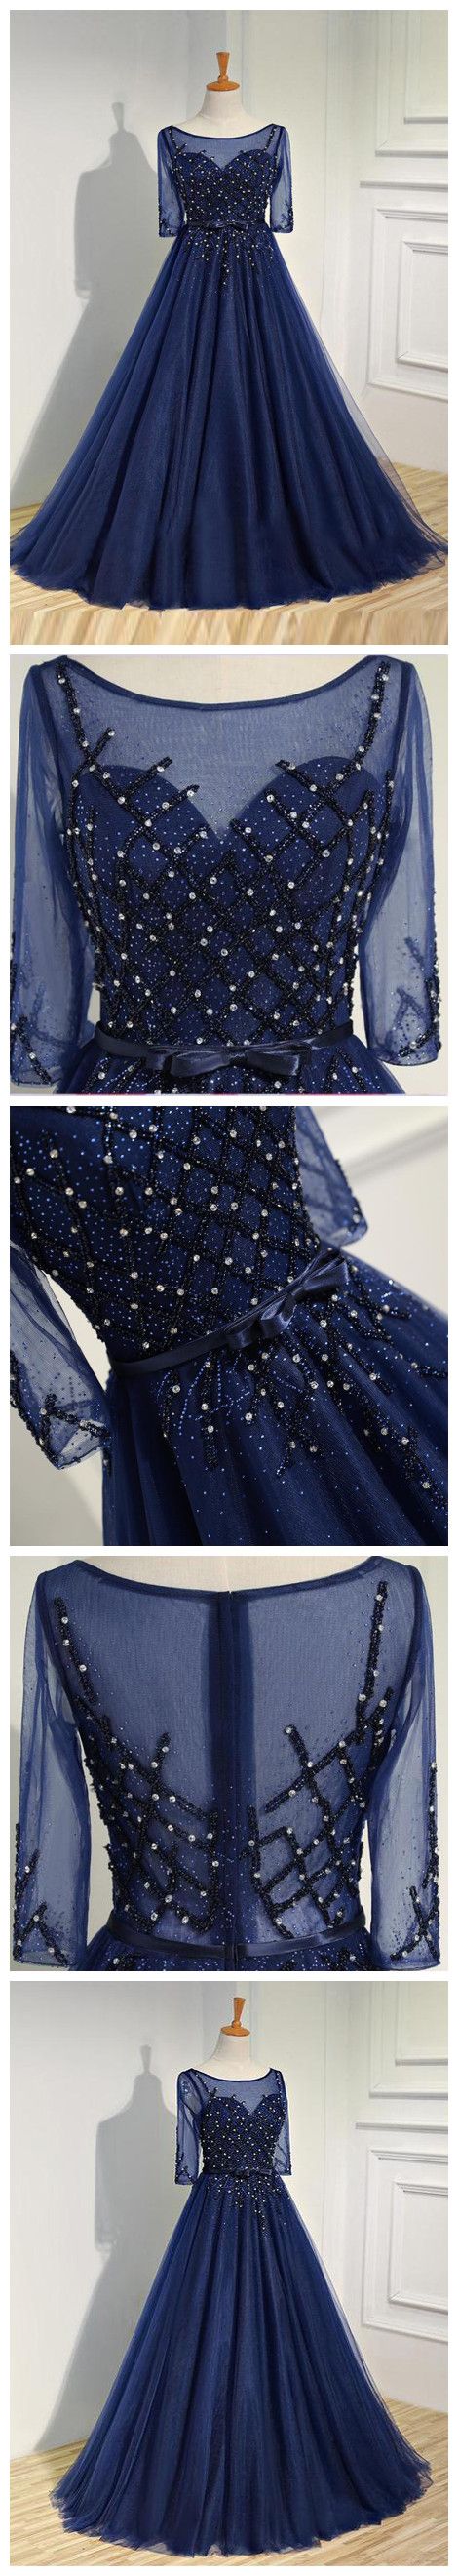 Prom Dresses A Line,prom Dresses Long,prom Dresses With Sleeves,gorgeous Prom Dresses,prom Dresses Navy,pd14632